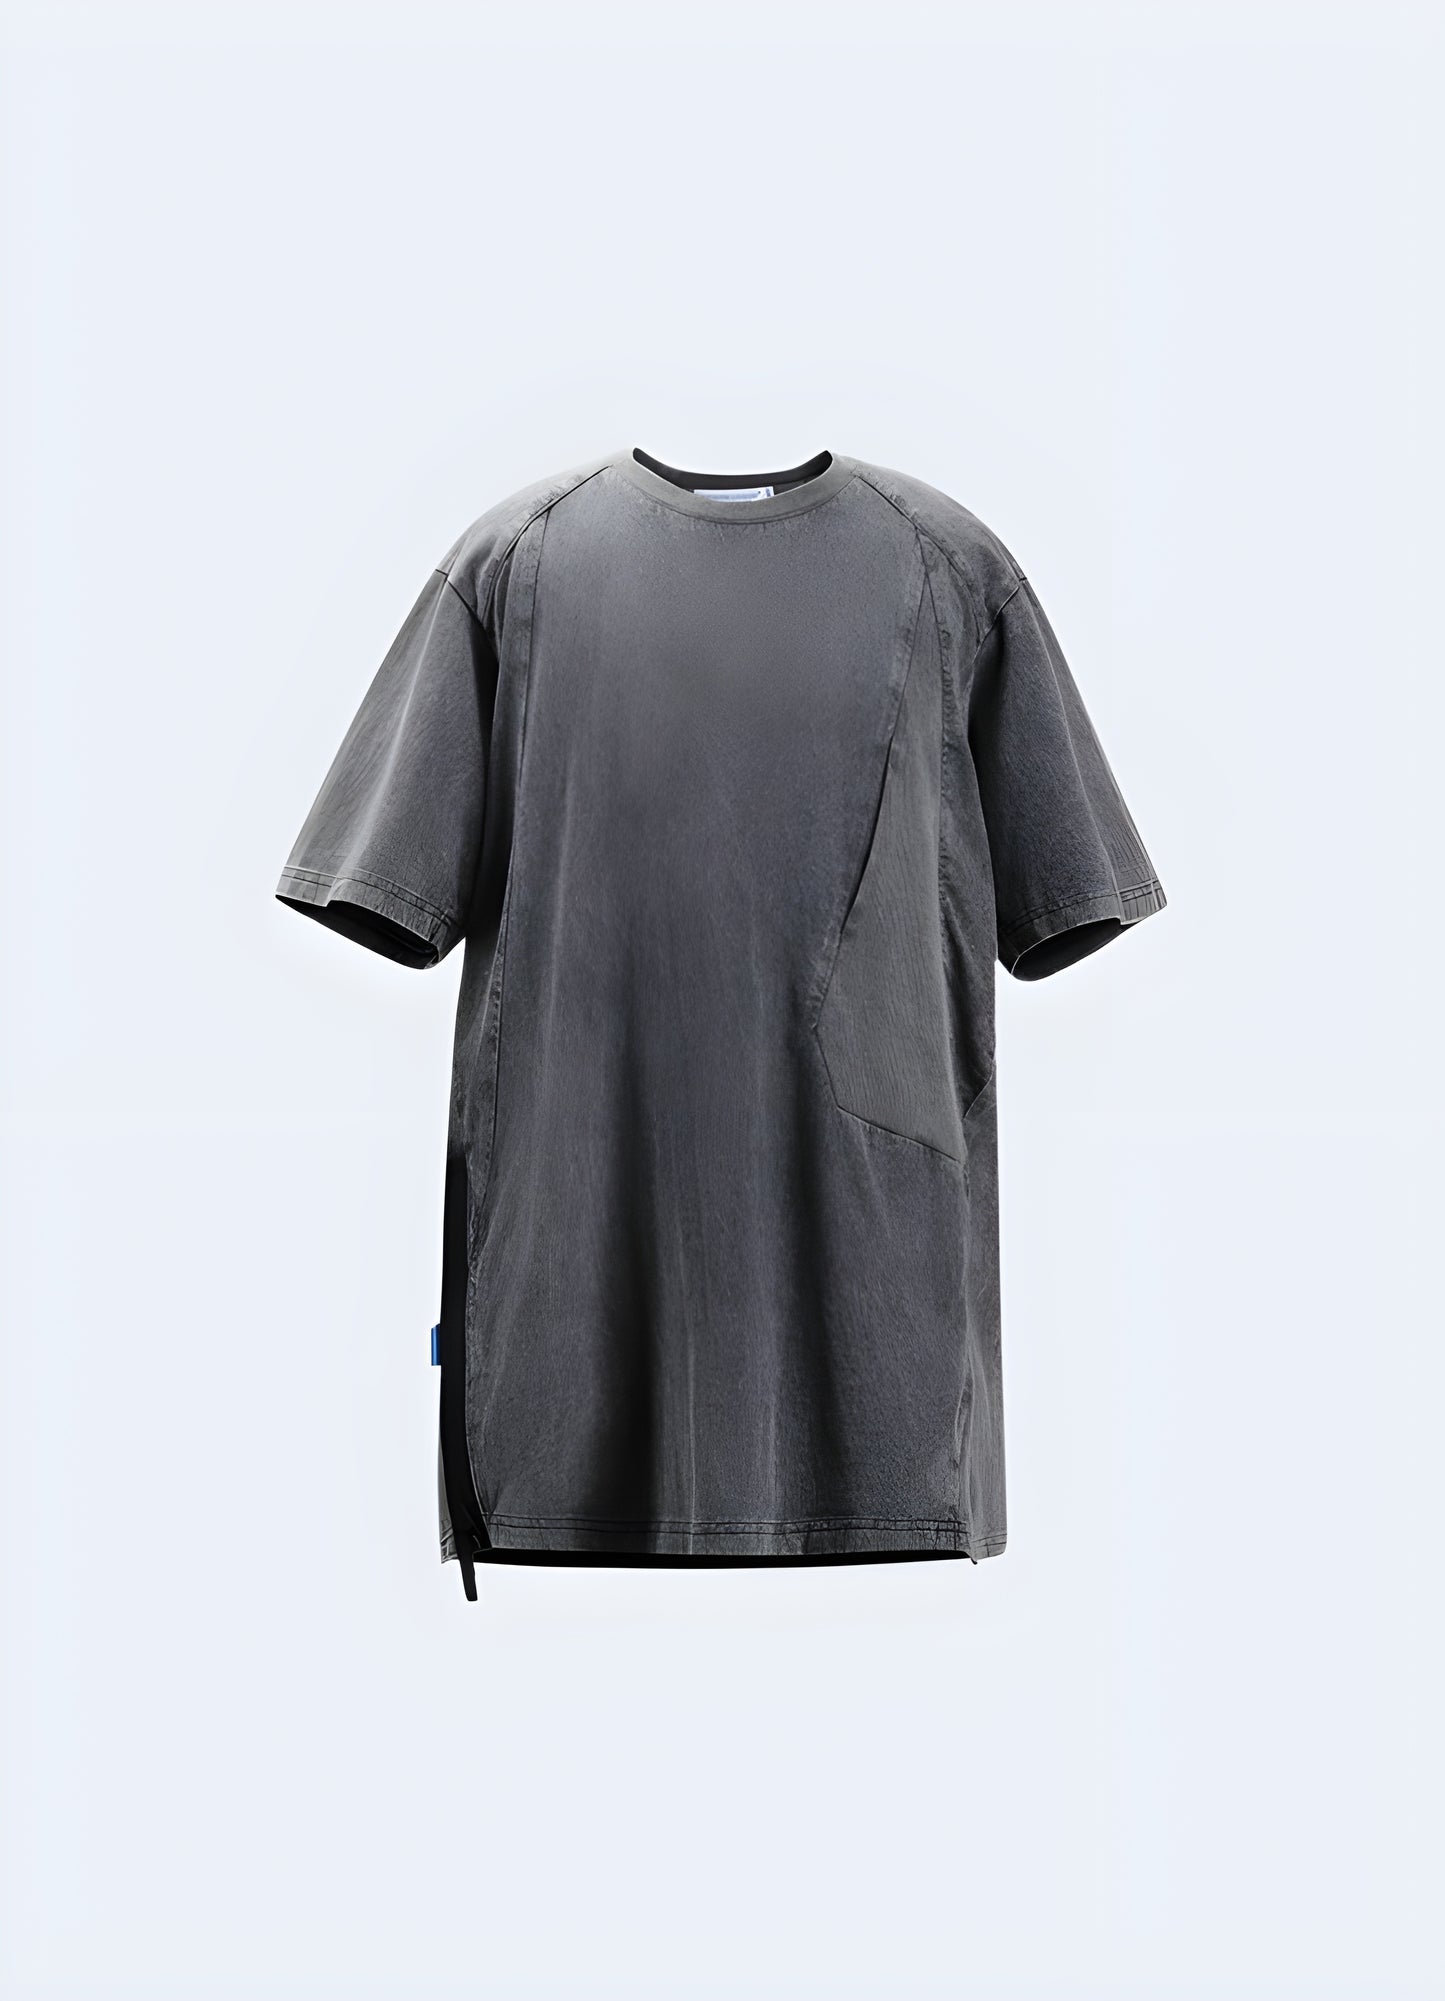 This futuristic fashion-inspired t-shirt features an ingenious secret diagonal pocket at the heart.